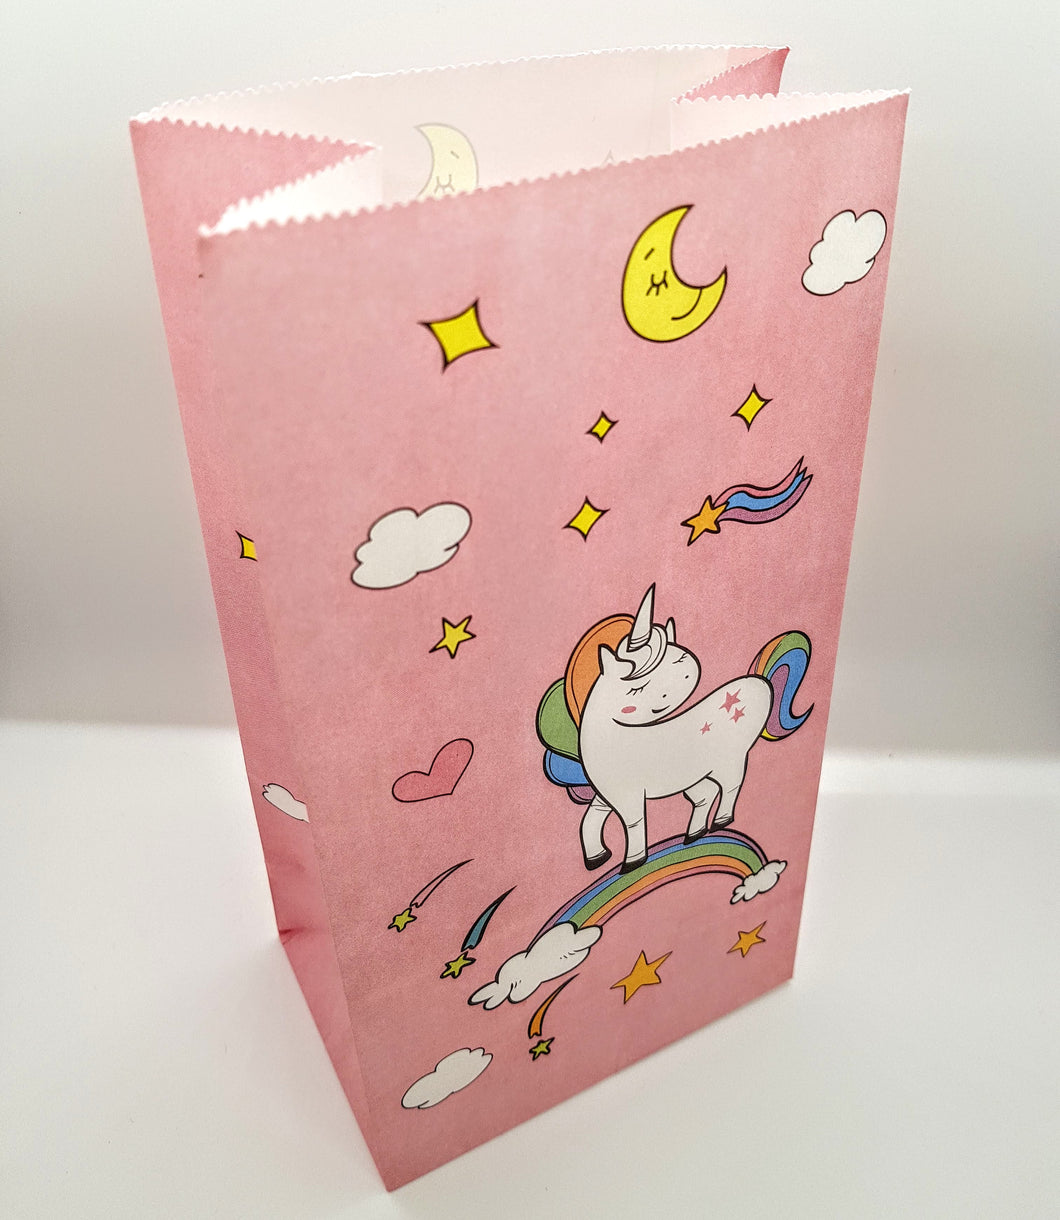 Unicorn Paper Gift Bag with Sticker